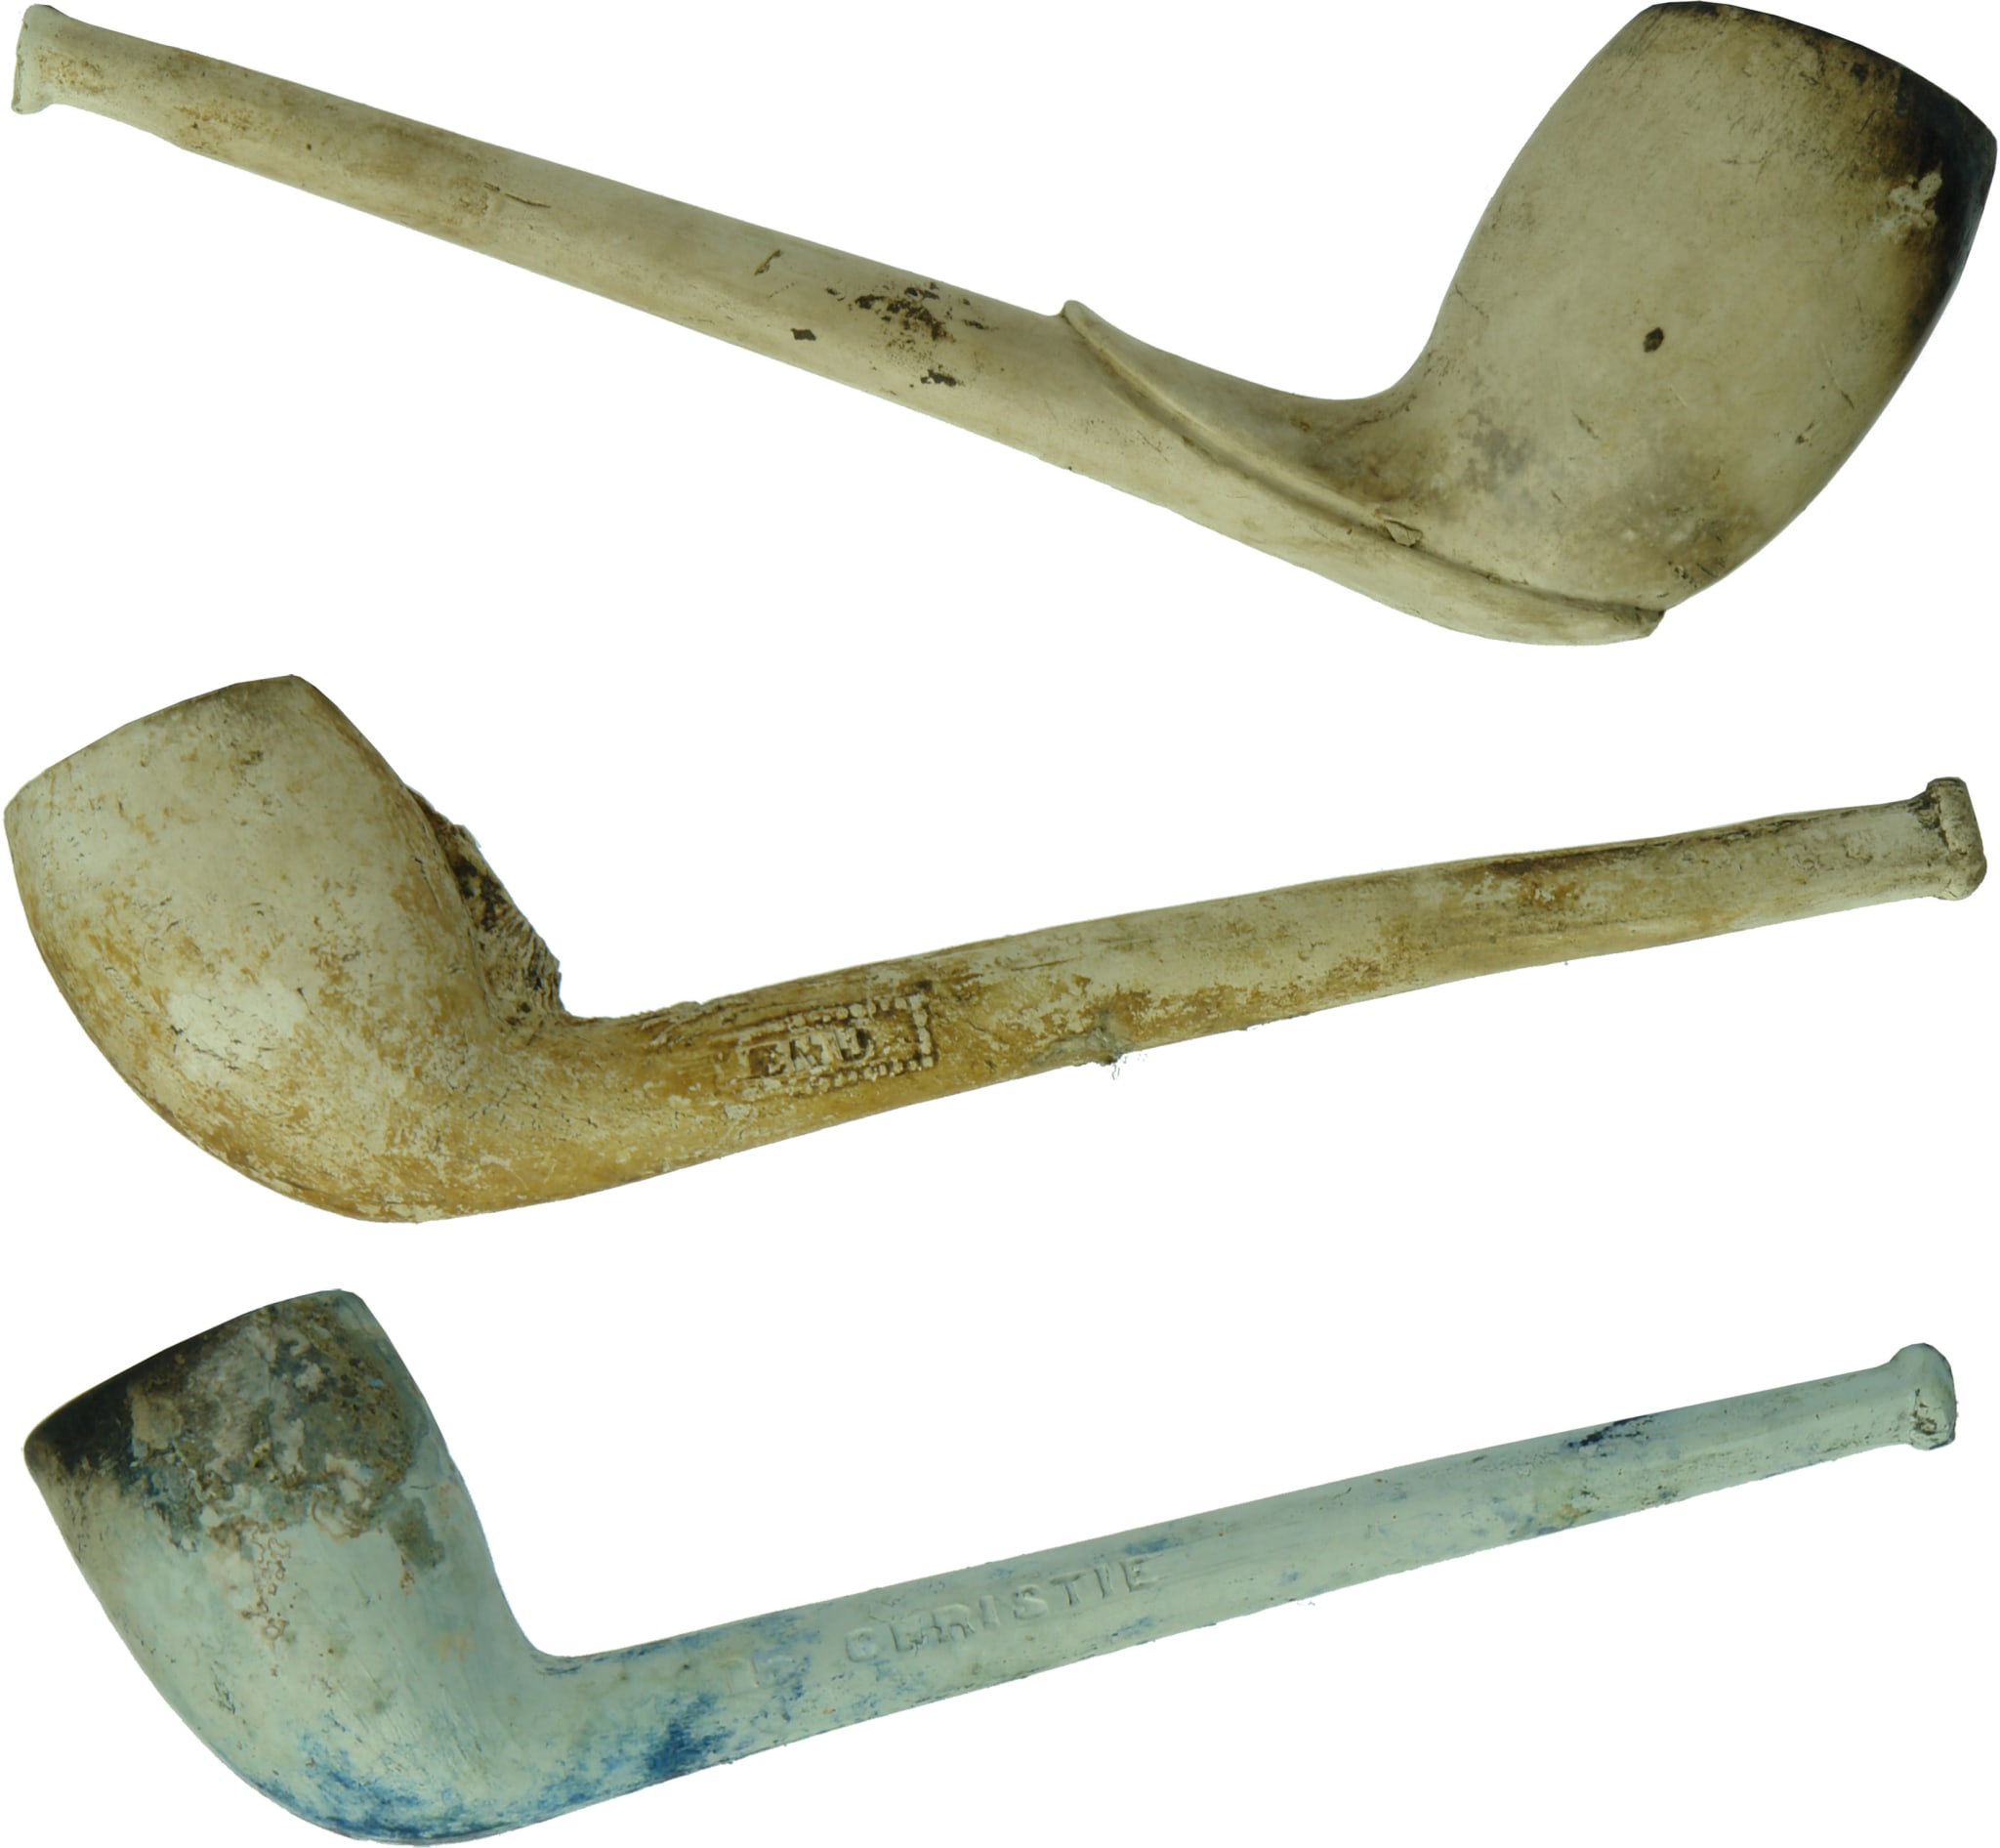 Antique Clay Tobacco Pipes